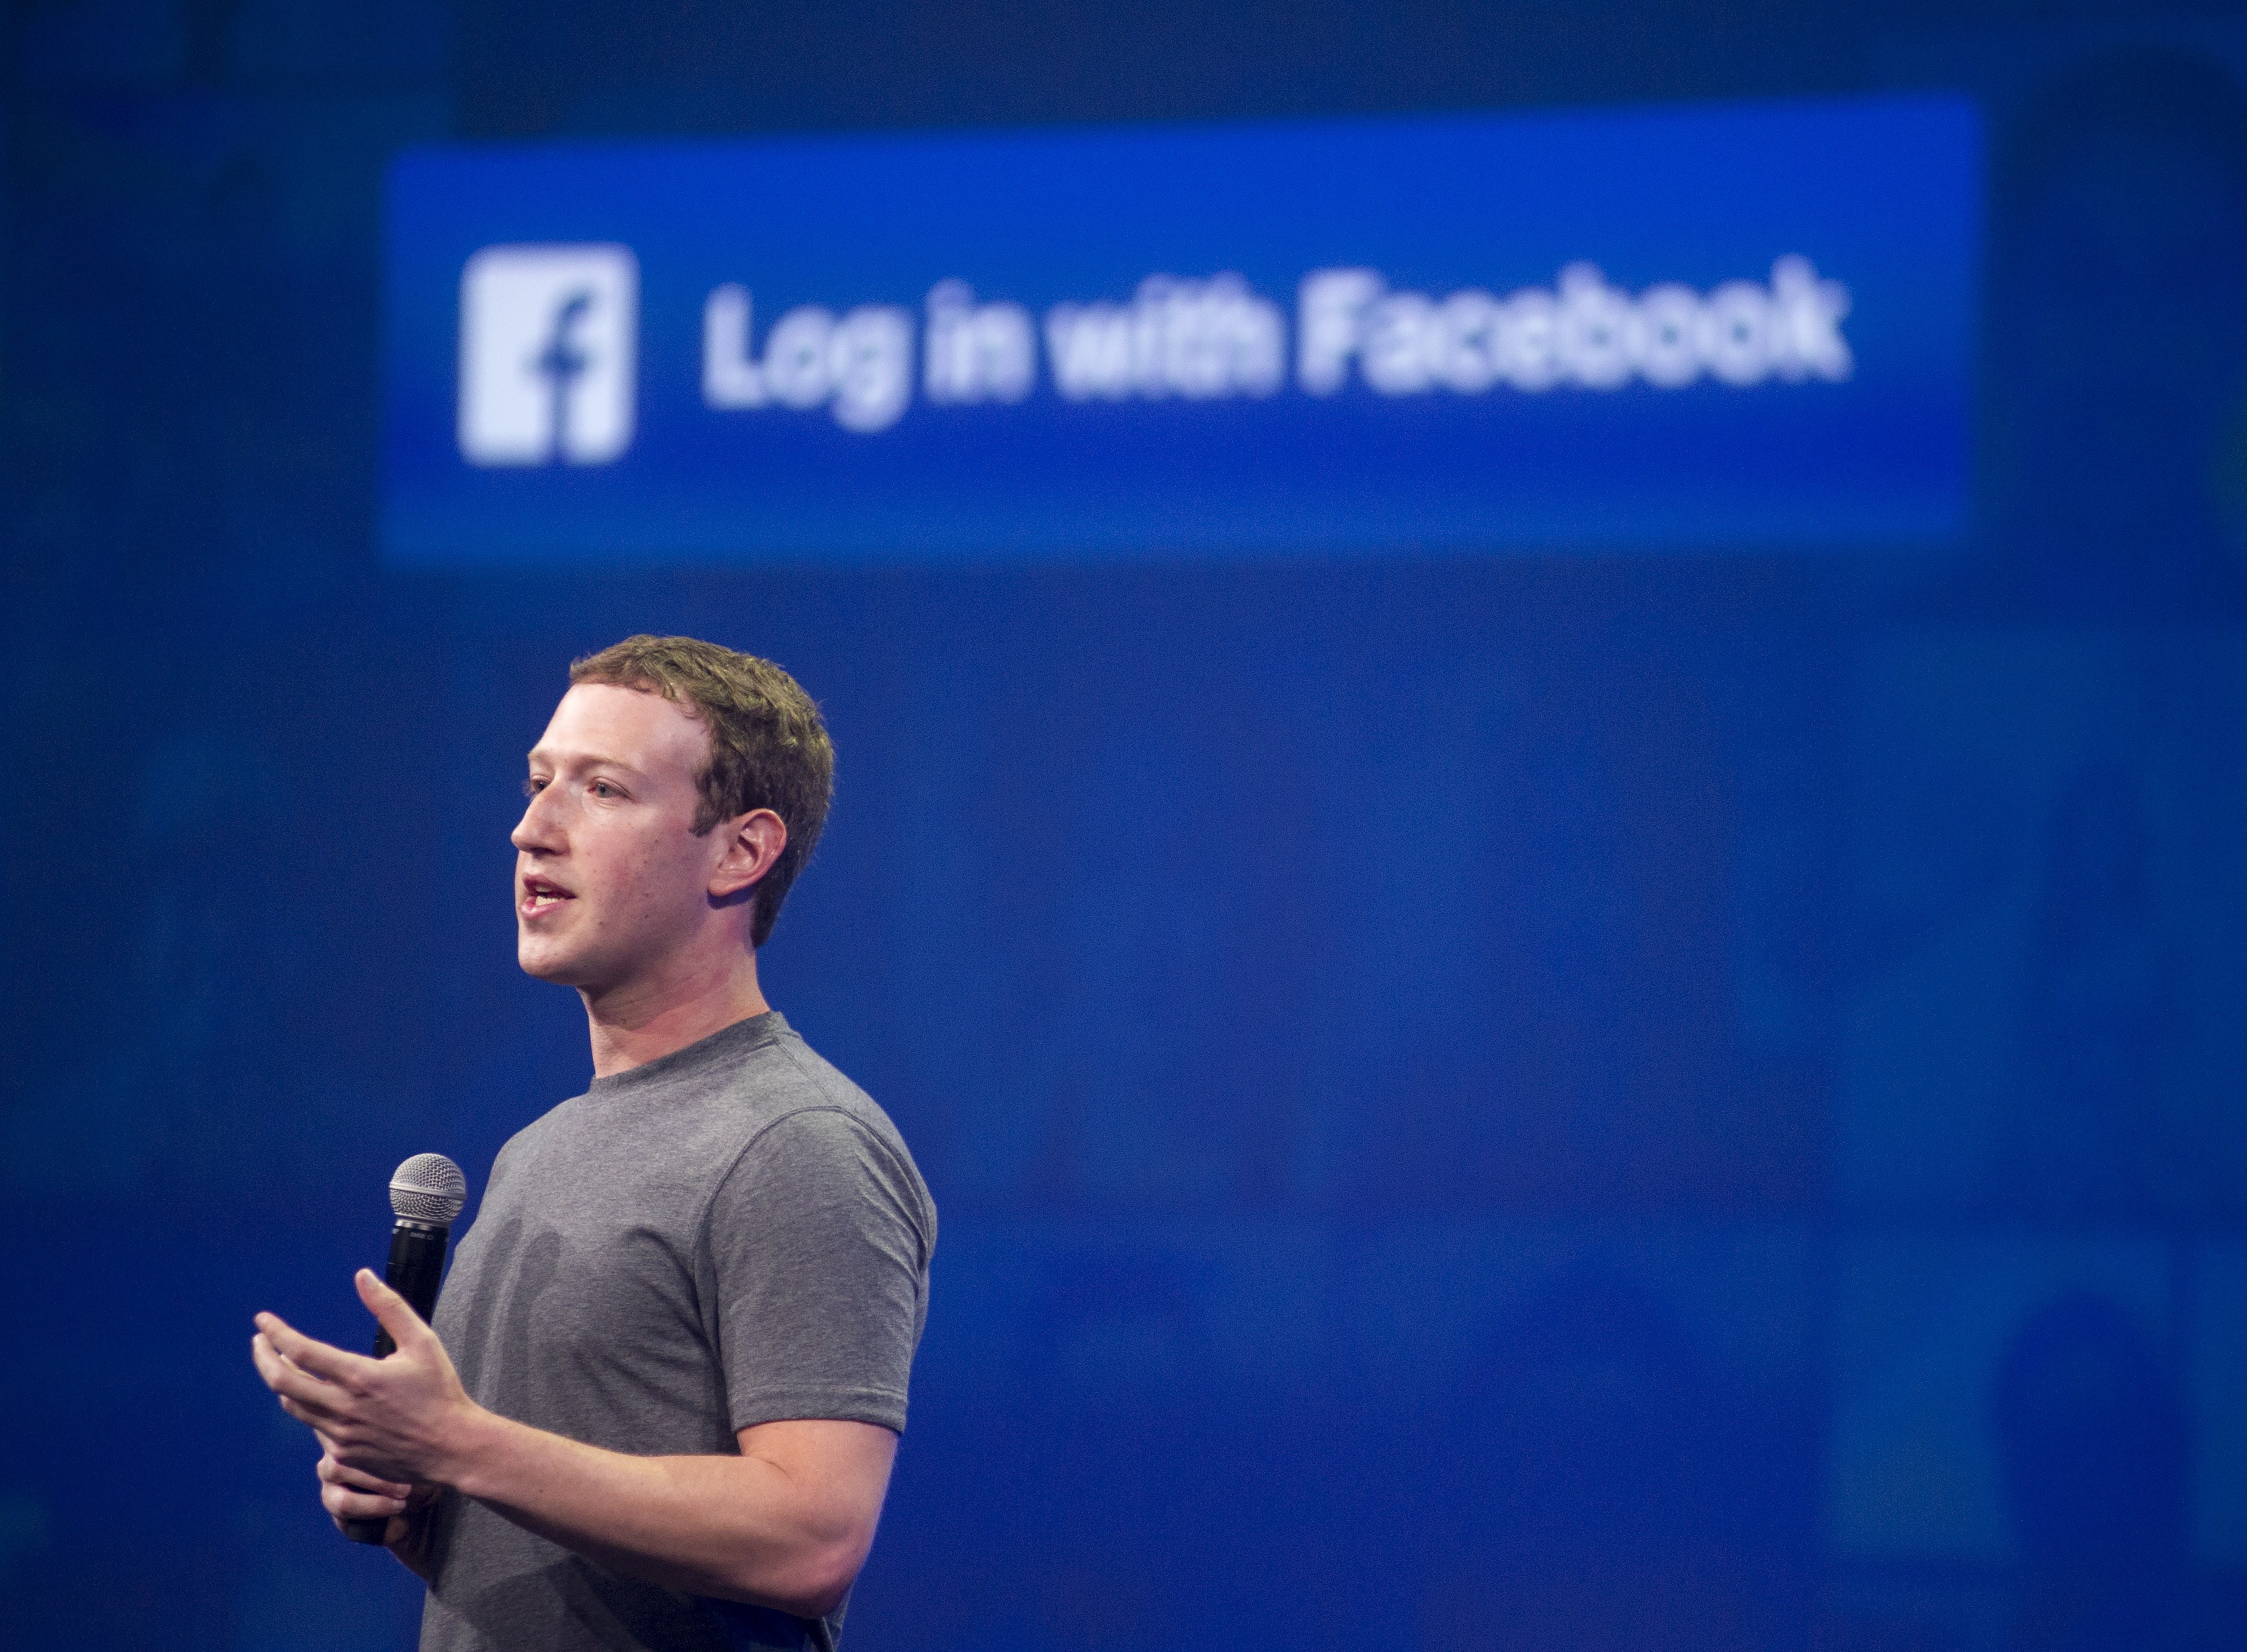 Facebook CEO Mark Zuckerberg speaks at the F8 summit in San Francisco, California, on March 25, 2015. (Josh Edelson&mdash;AFP/Getty Images)